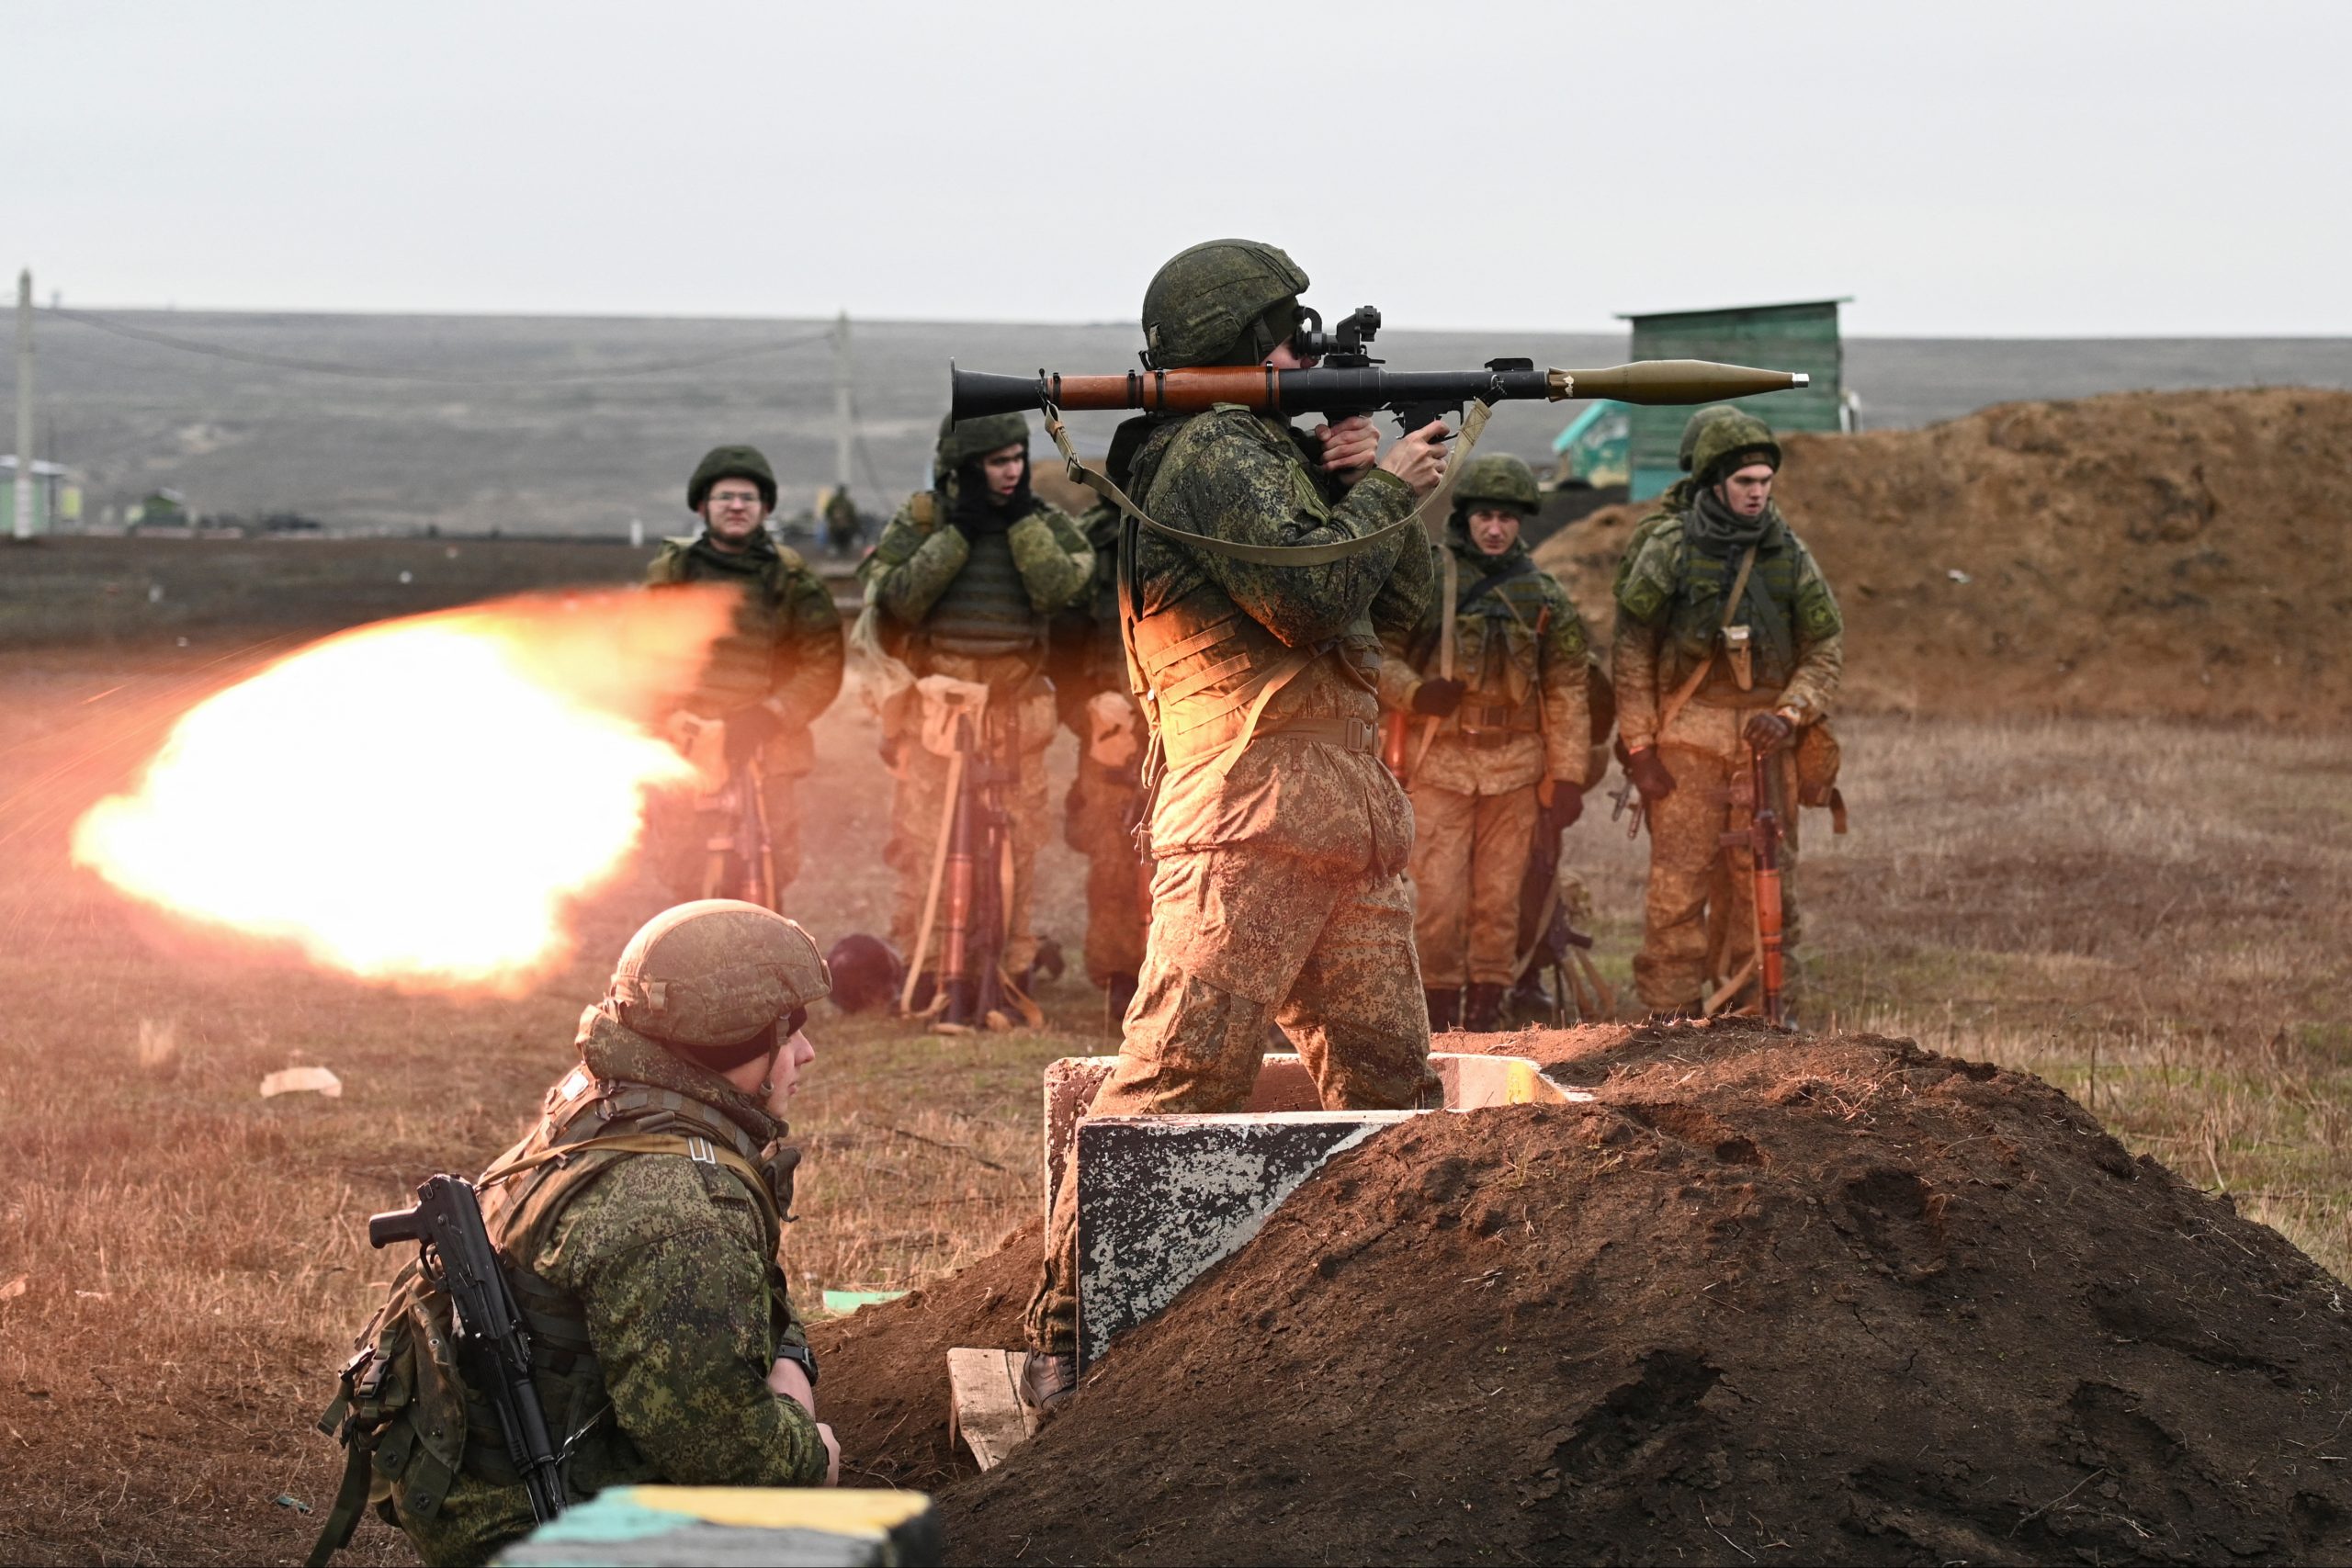 Test of the Western states. Russian soldiers near the Ukraine border